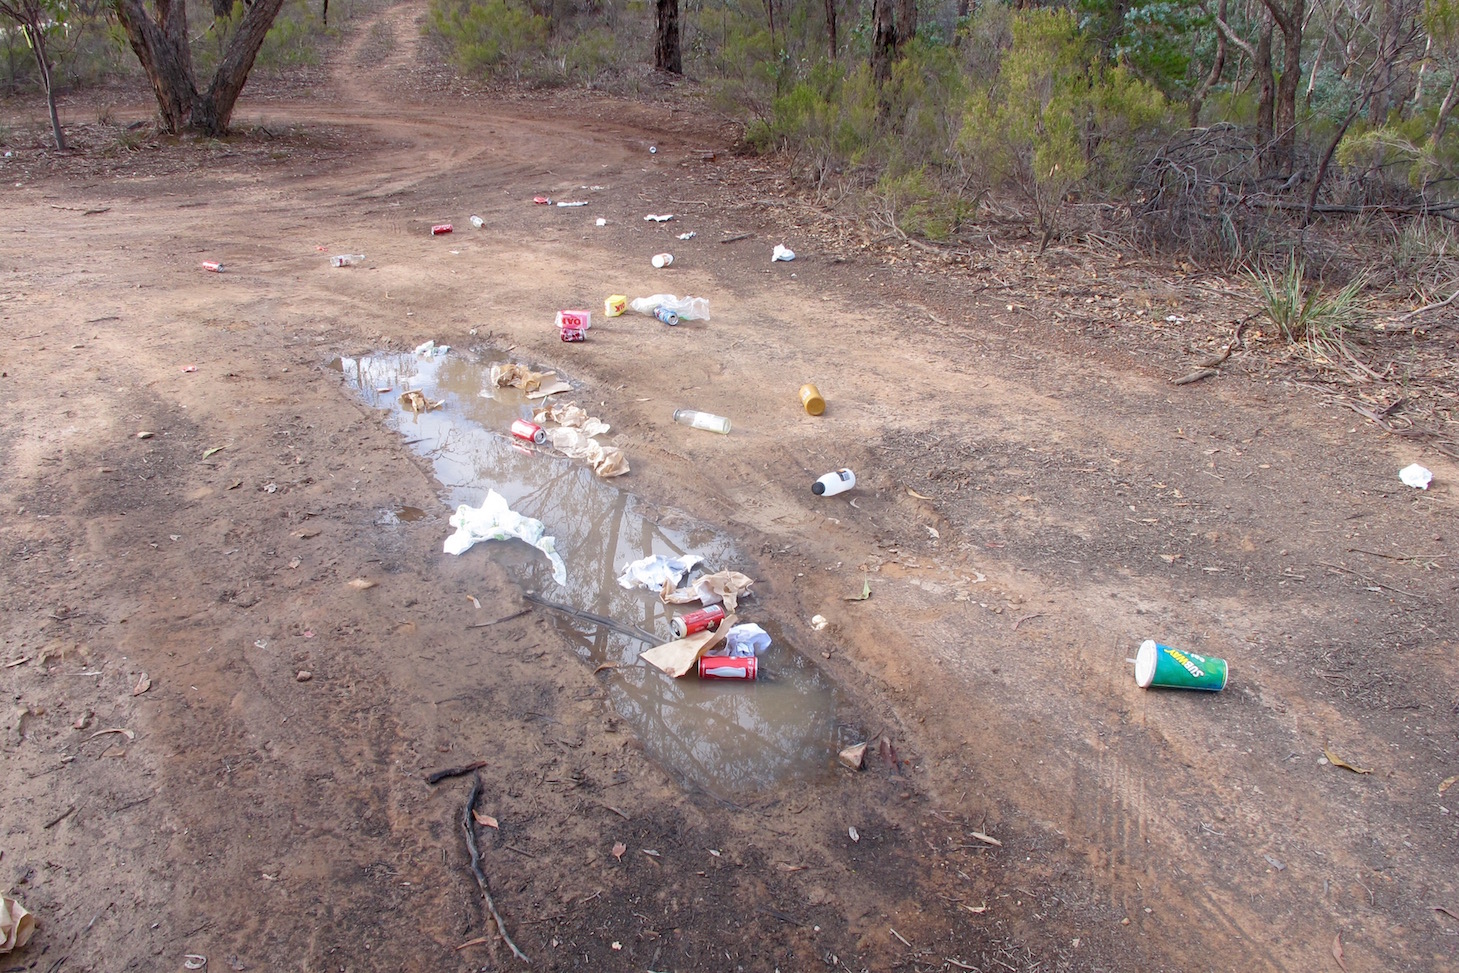 Rubbish strewn over the track opposite Kalimna Point. A couch has been pushed into the bush nearby. This track has to be frequently cleaned by Parks Victoria, at the taxpayers' expense.